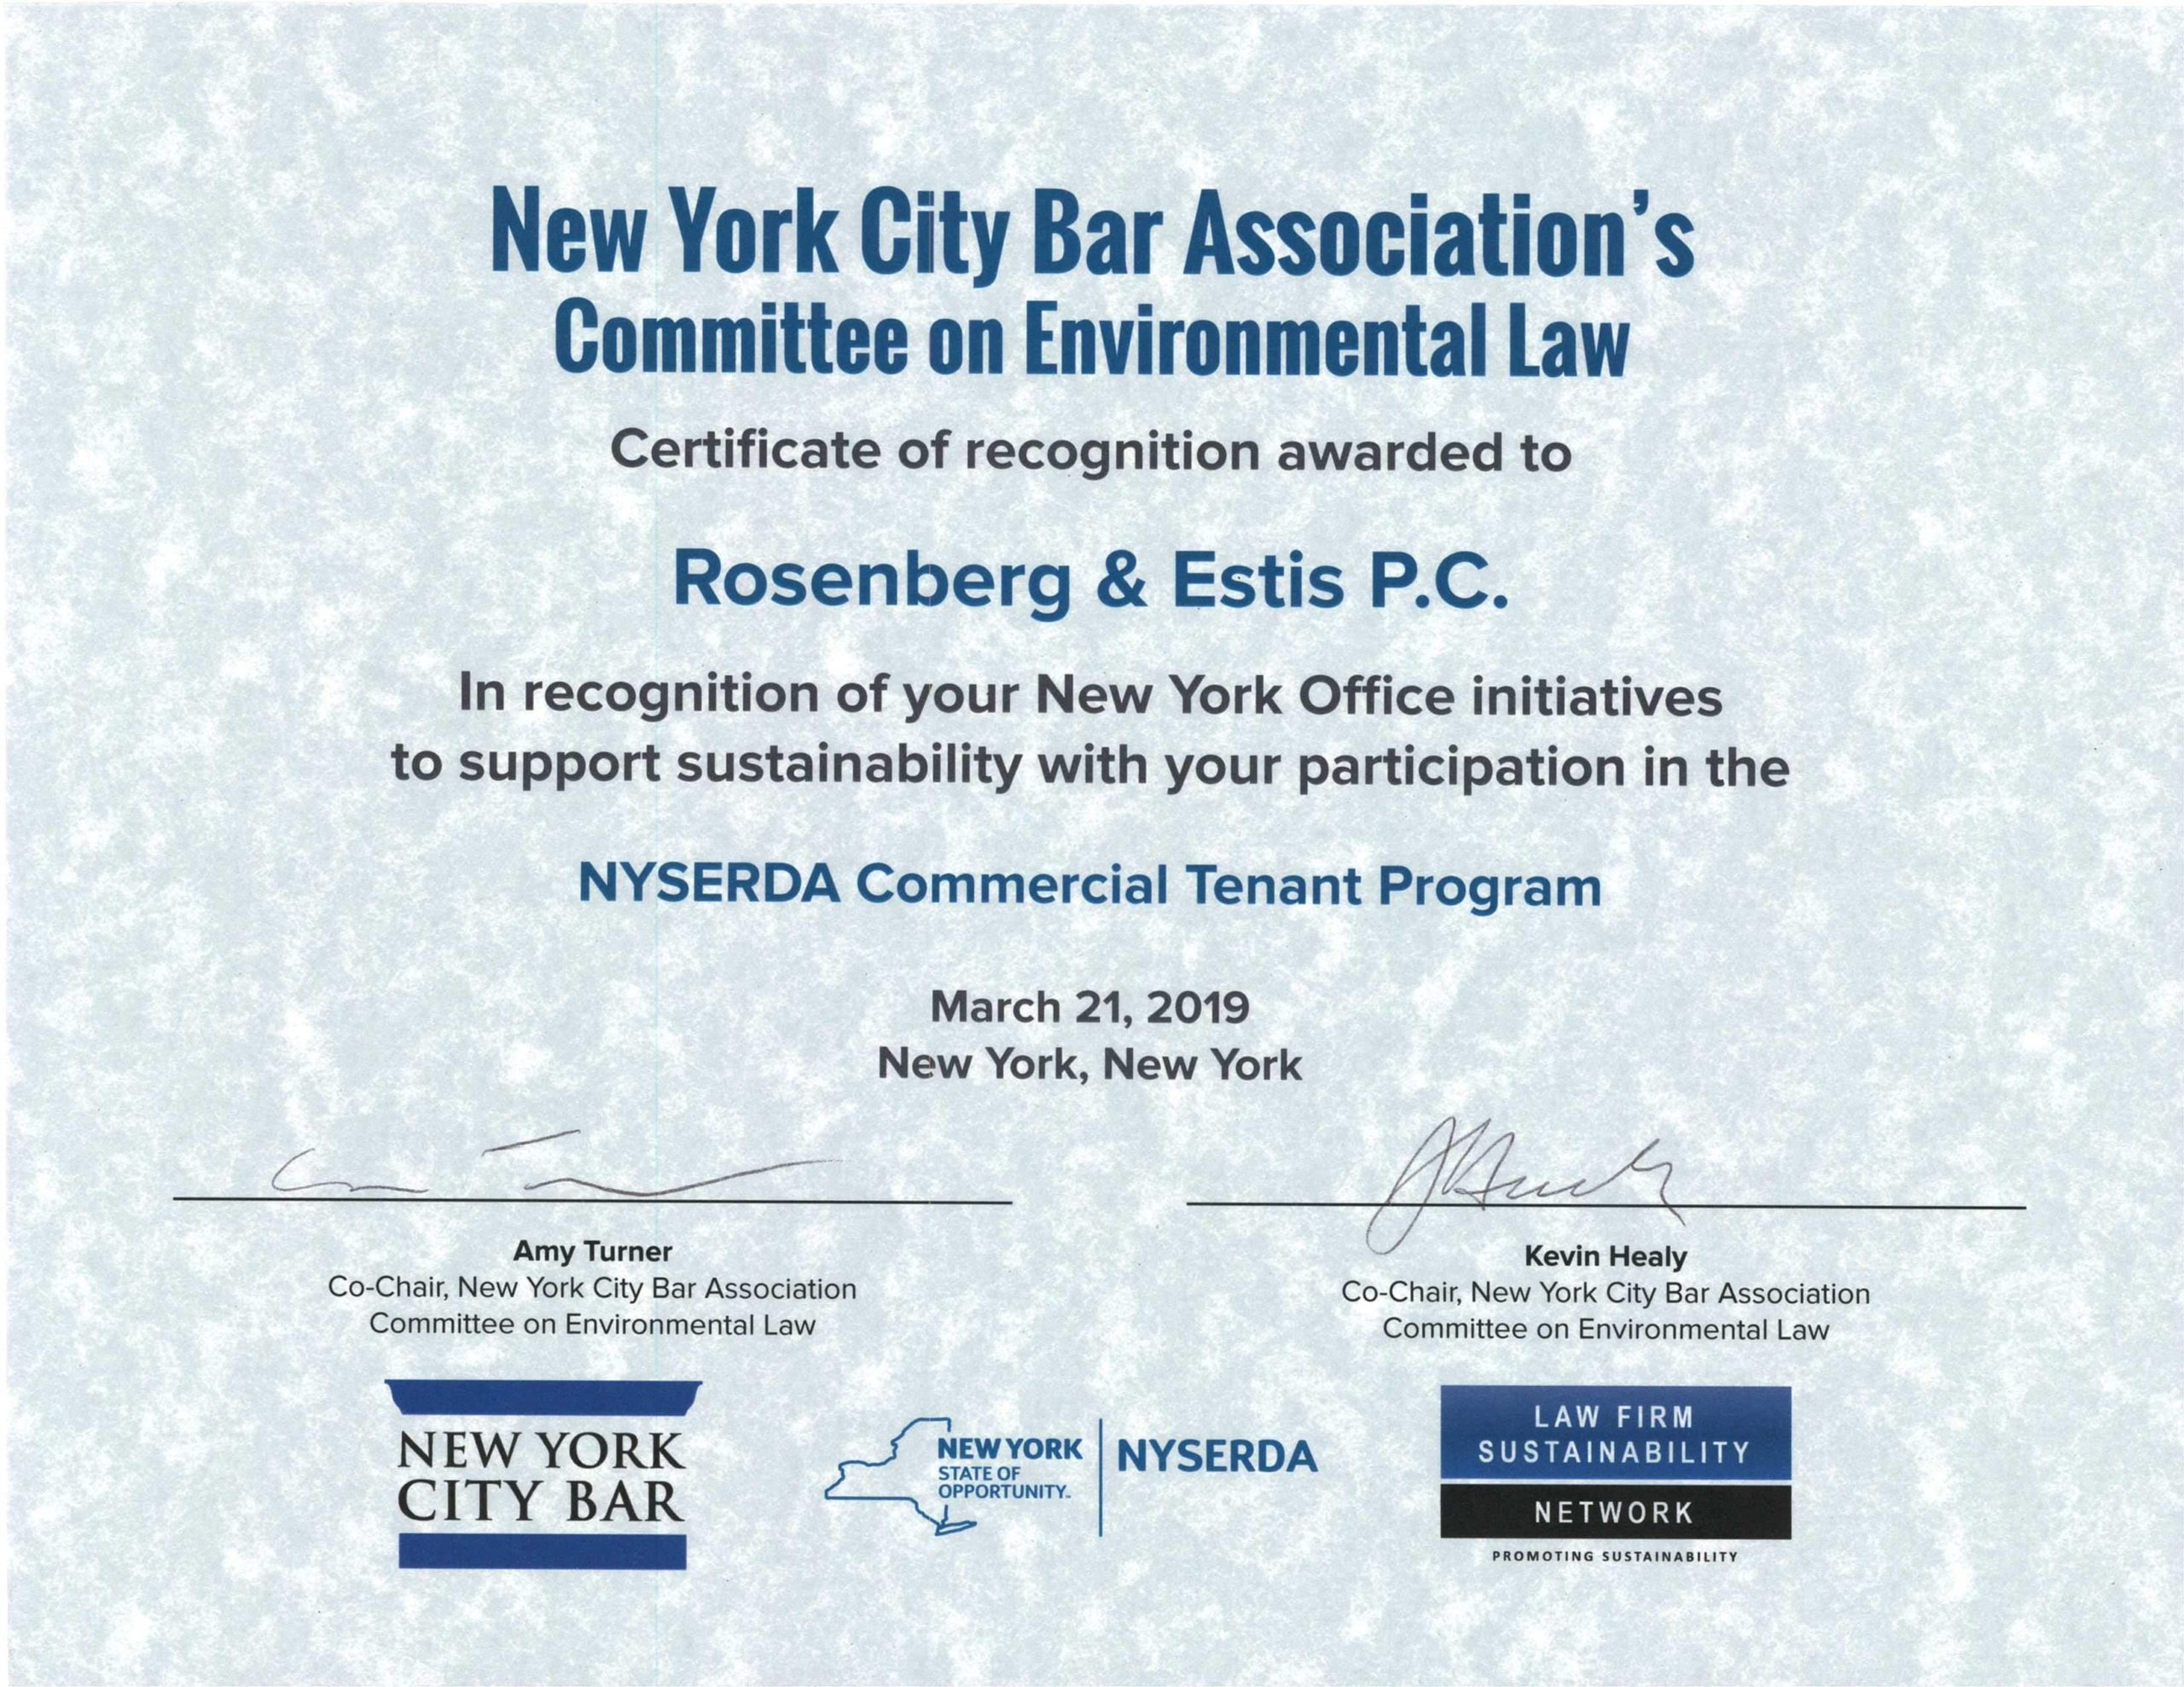 Photo of the New York Bar Association's Committee on Environment Law certificate of recognition awarded to Rosenberg & Estis P.C.